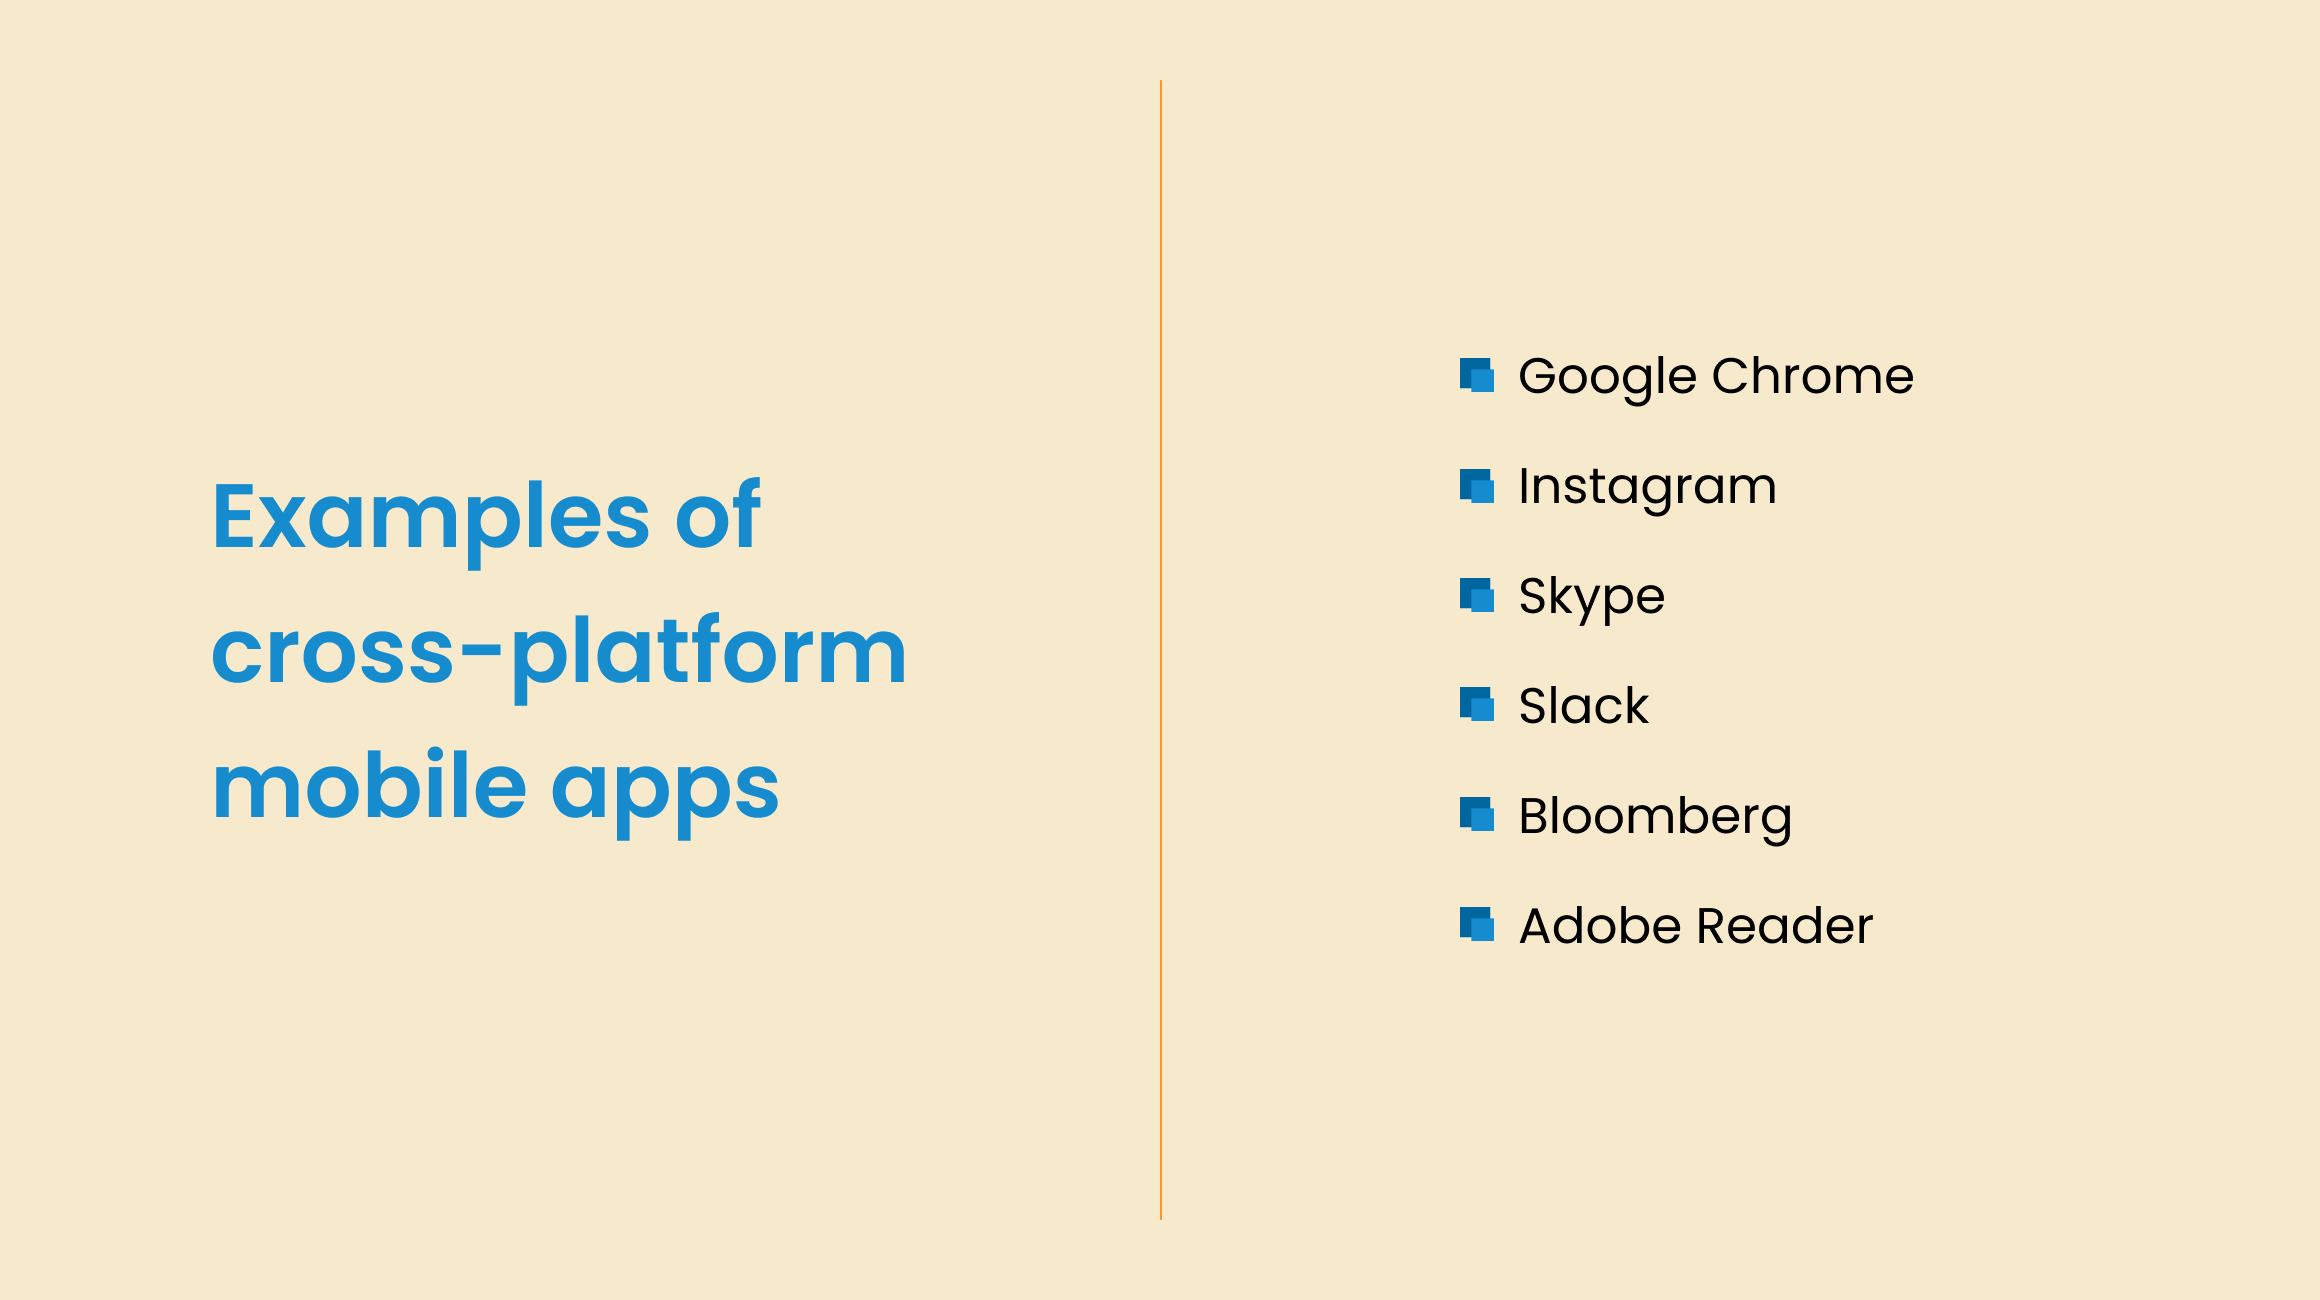 Examples of cross-platform mobile apps